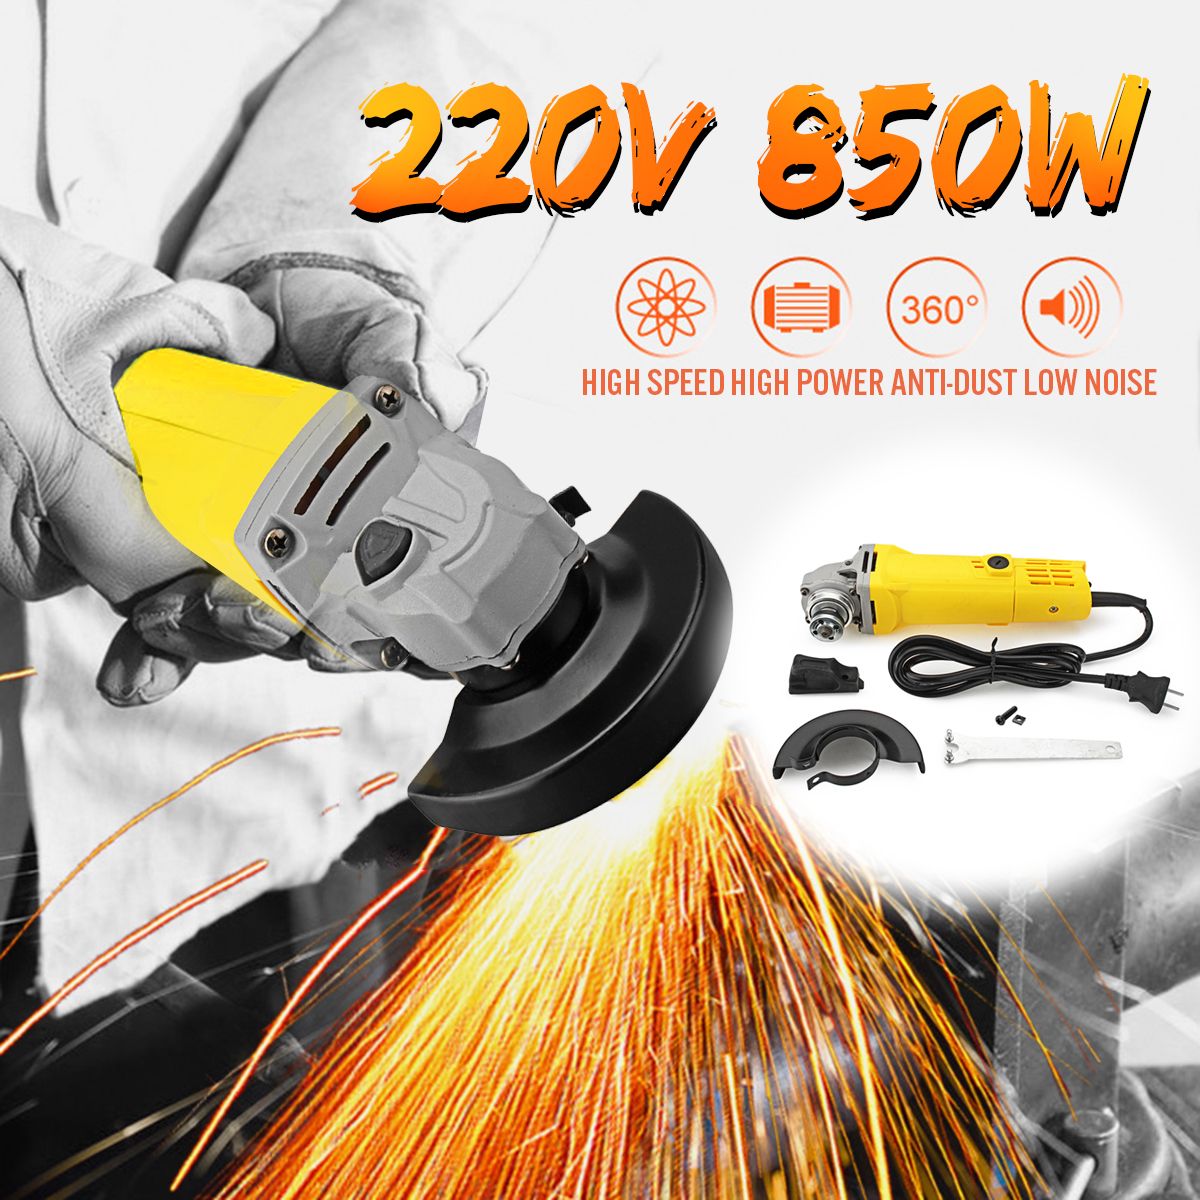 100mm-850W-220V-Portable-Electric-Angle-Grinder-Muti-Function-Household-Polish-Machine-Grinding-Cutt-1391941